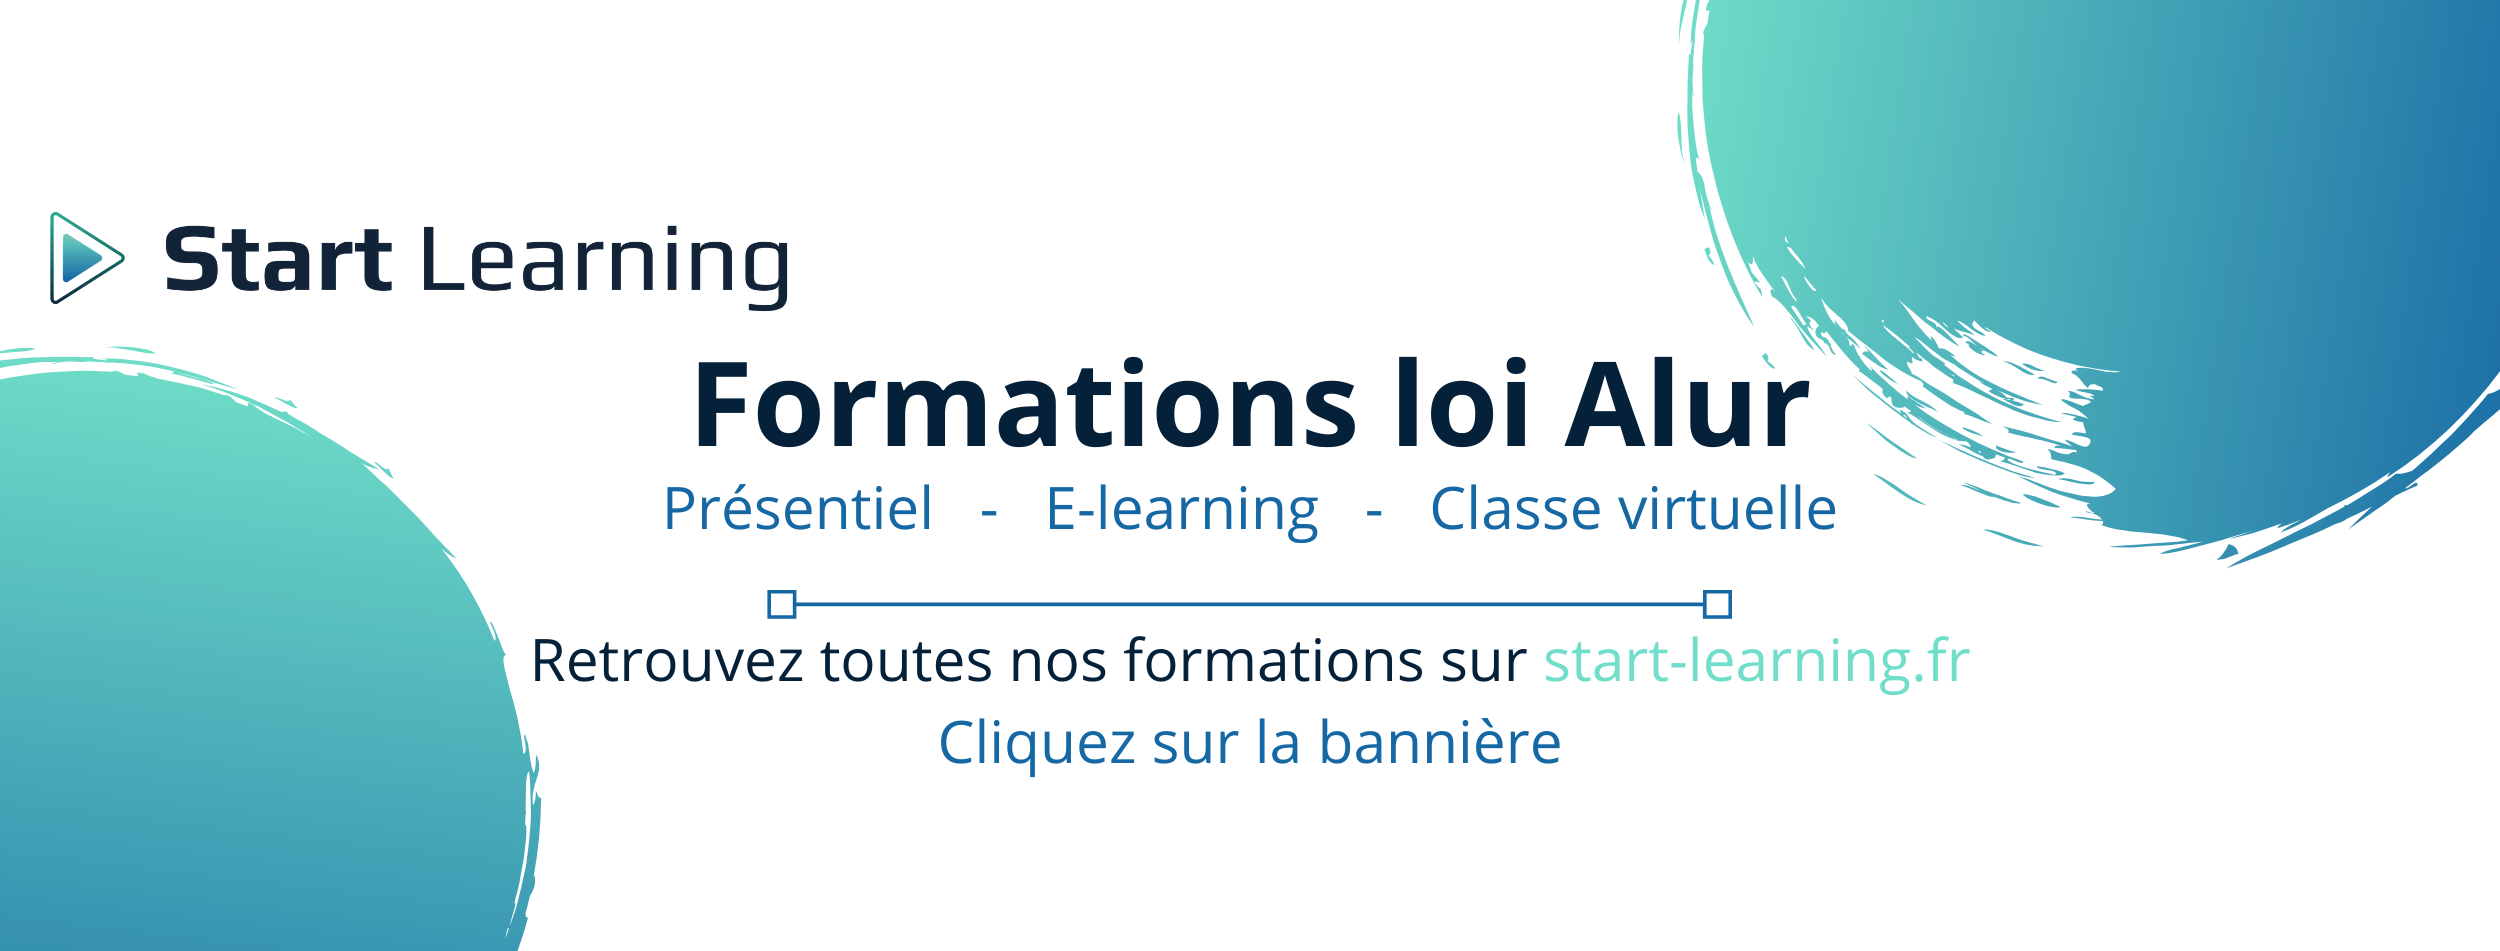 Formations loi Alur - Start Learning